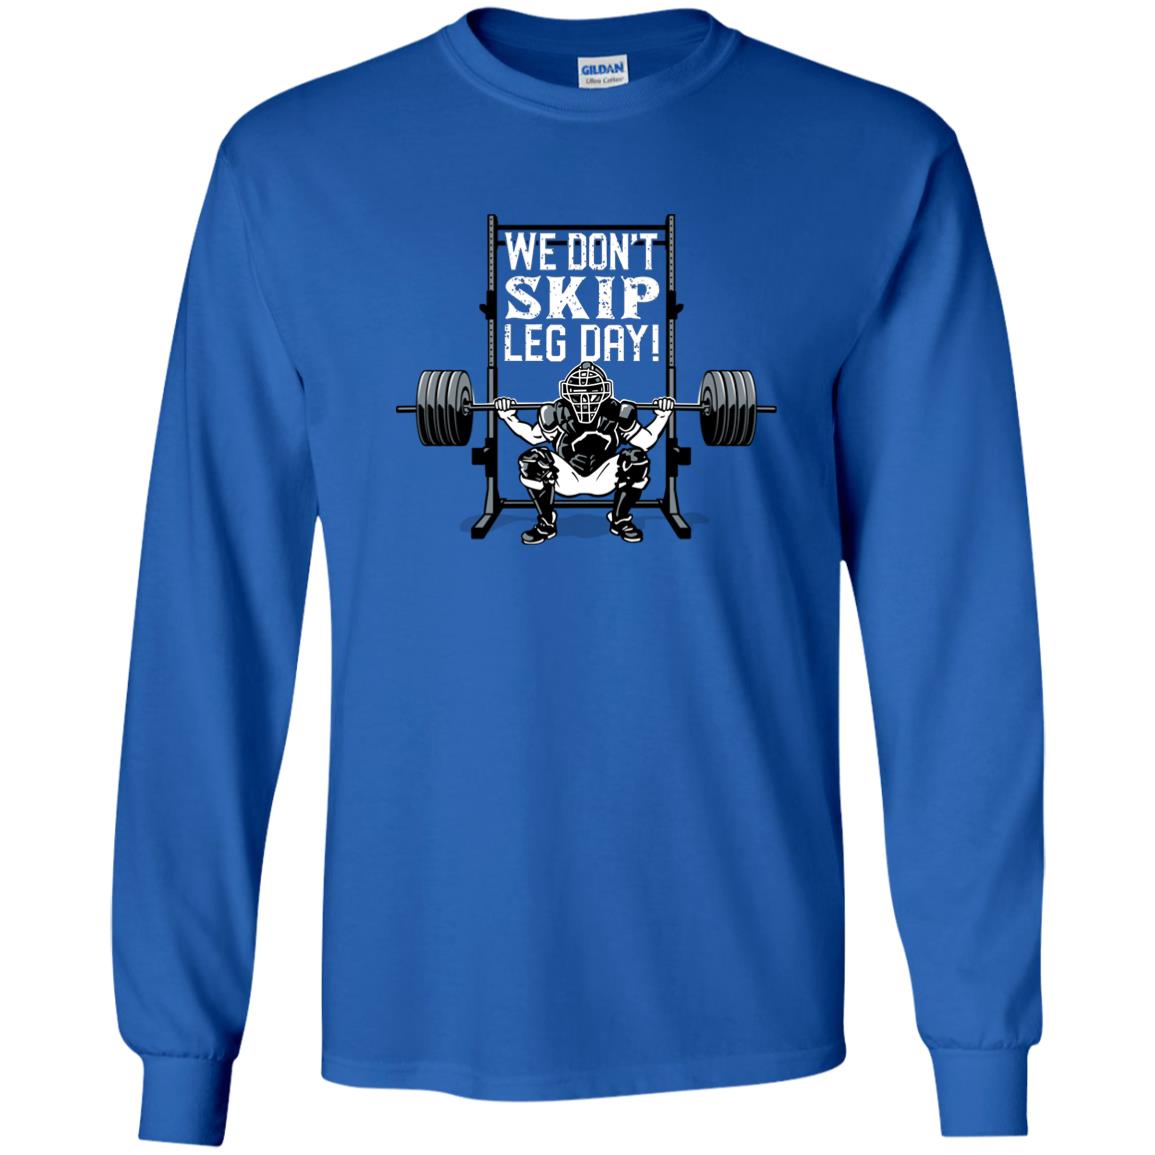 The-Catching-Guy-weight-long-sleeve-tee-catcher-blue